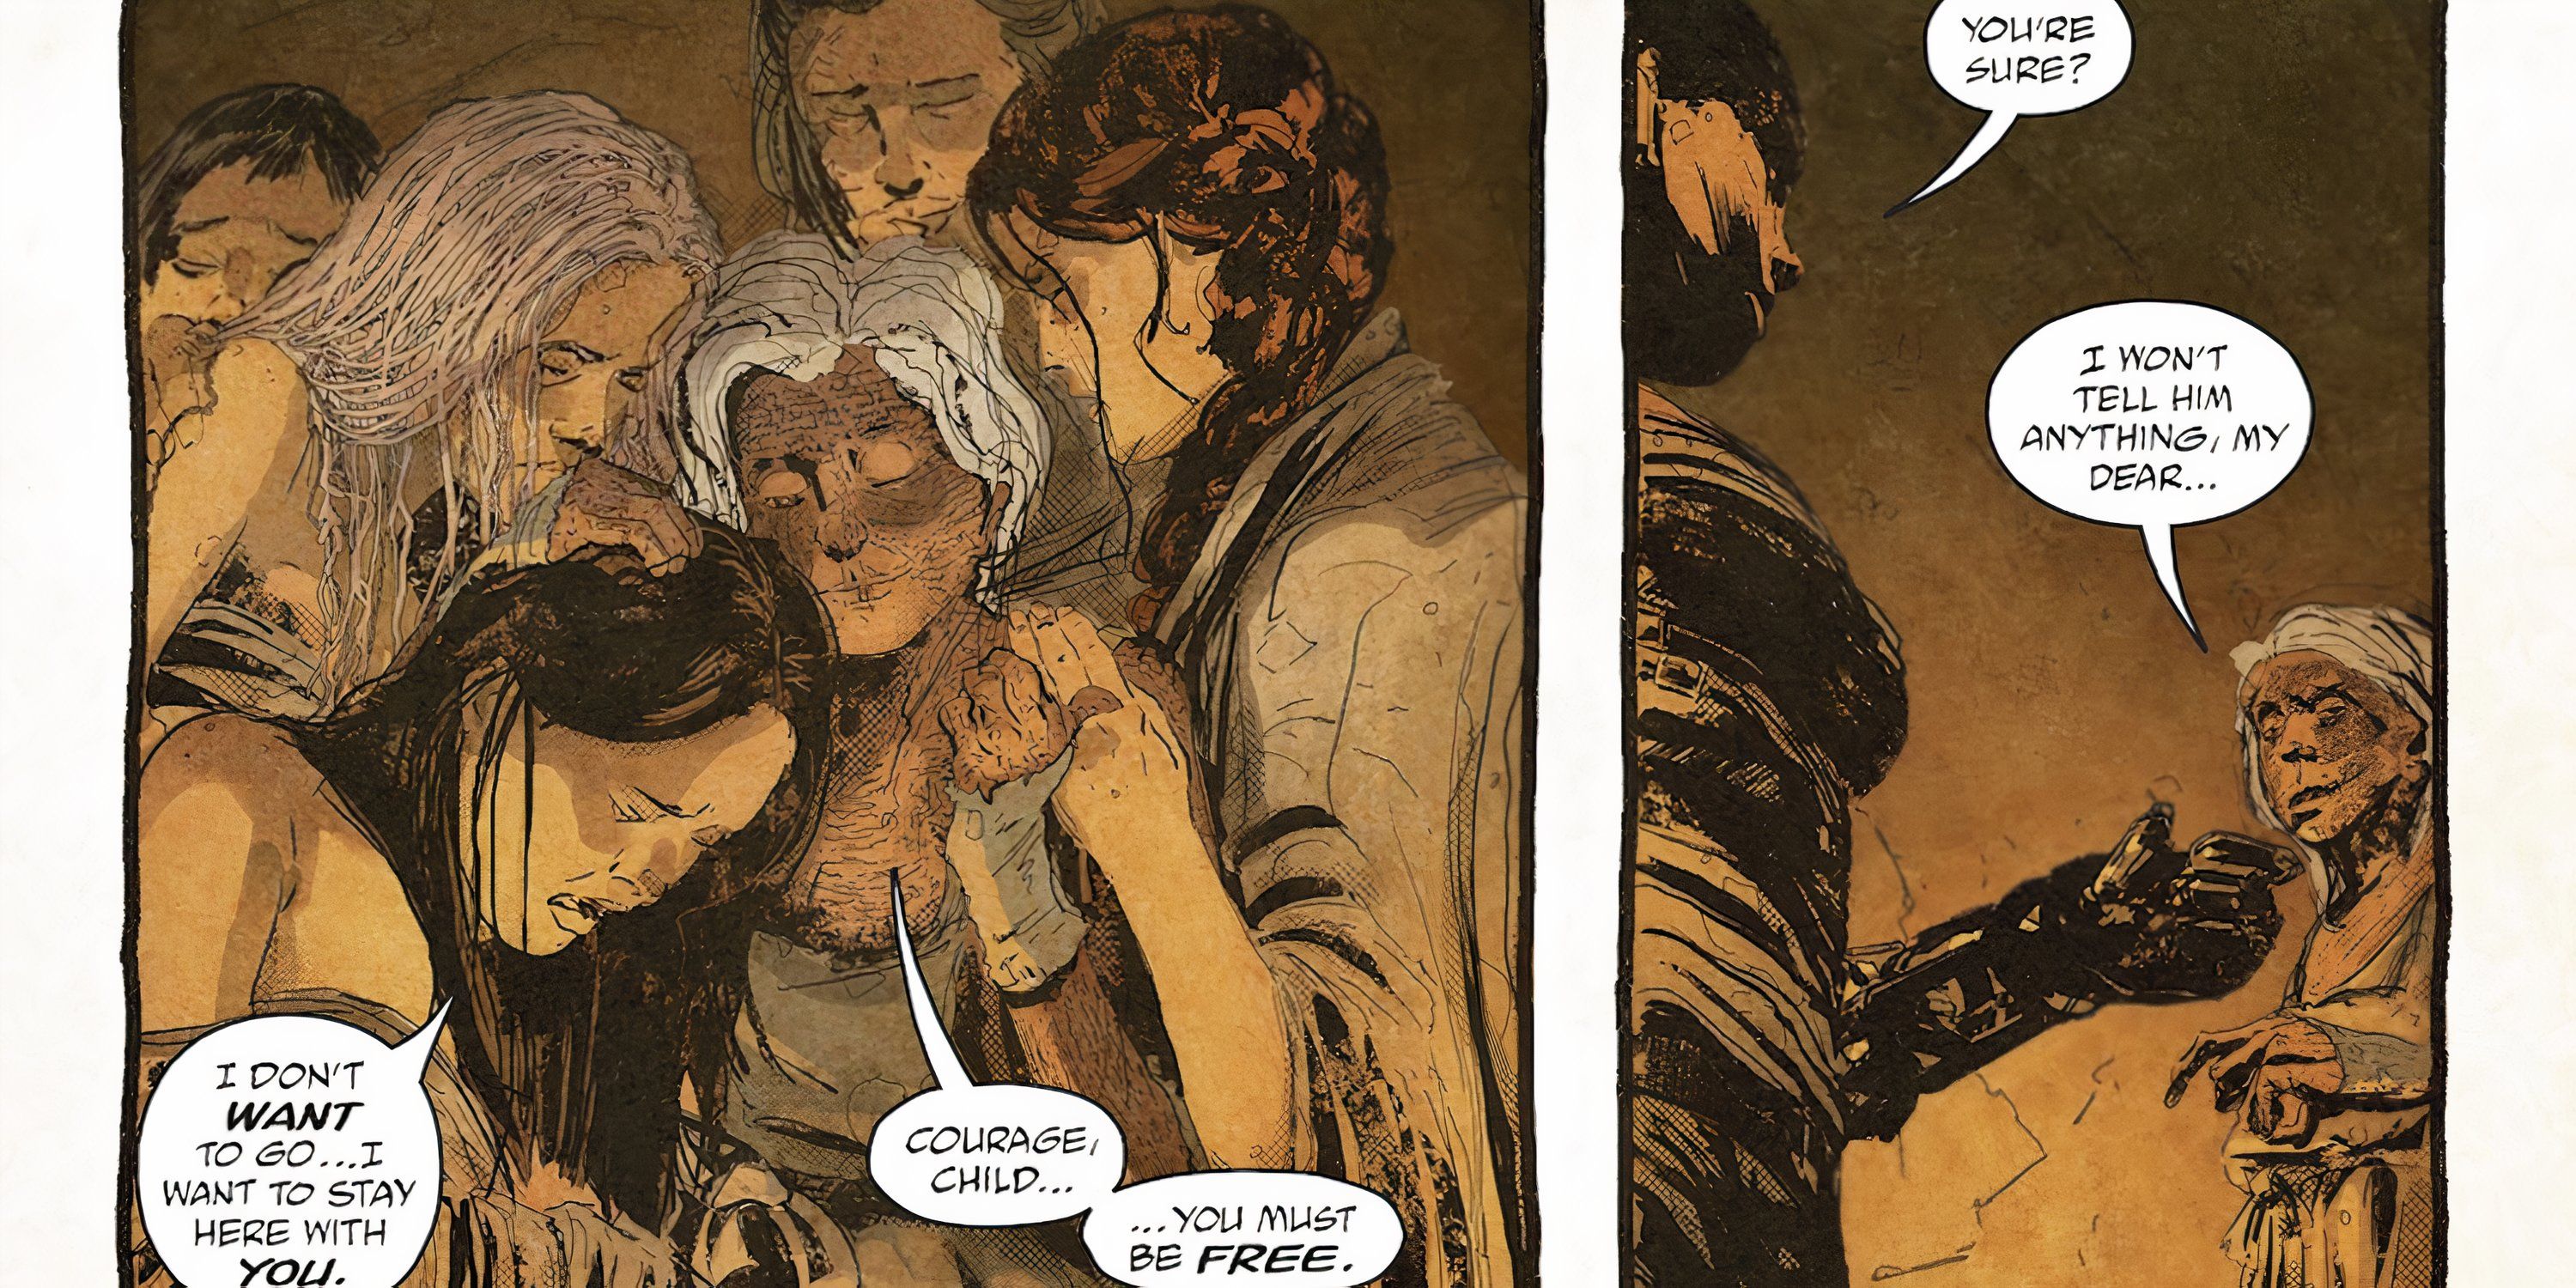 Mother Giddy hugs Immortan Joe's wives in the Mad Max: Fury Road comic.